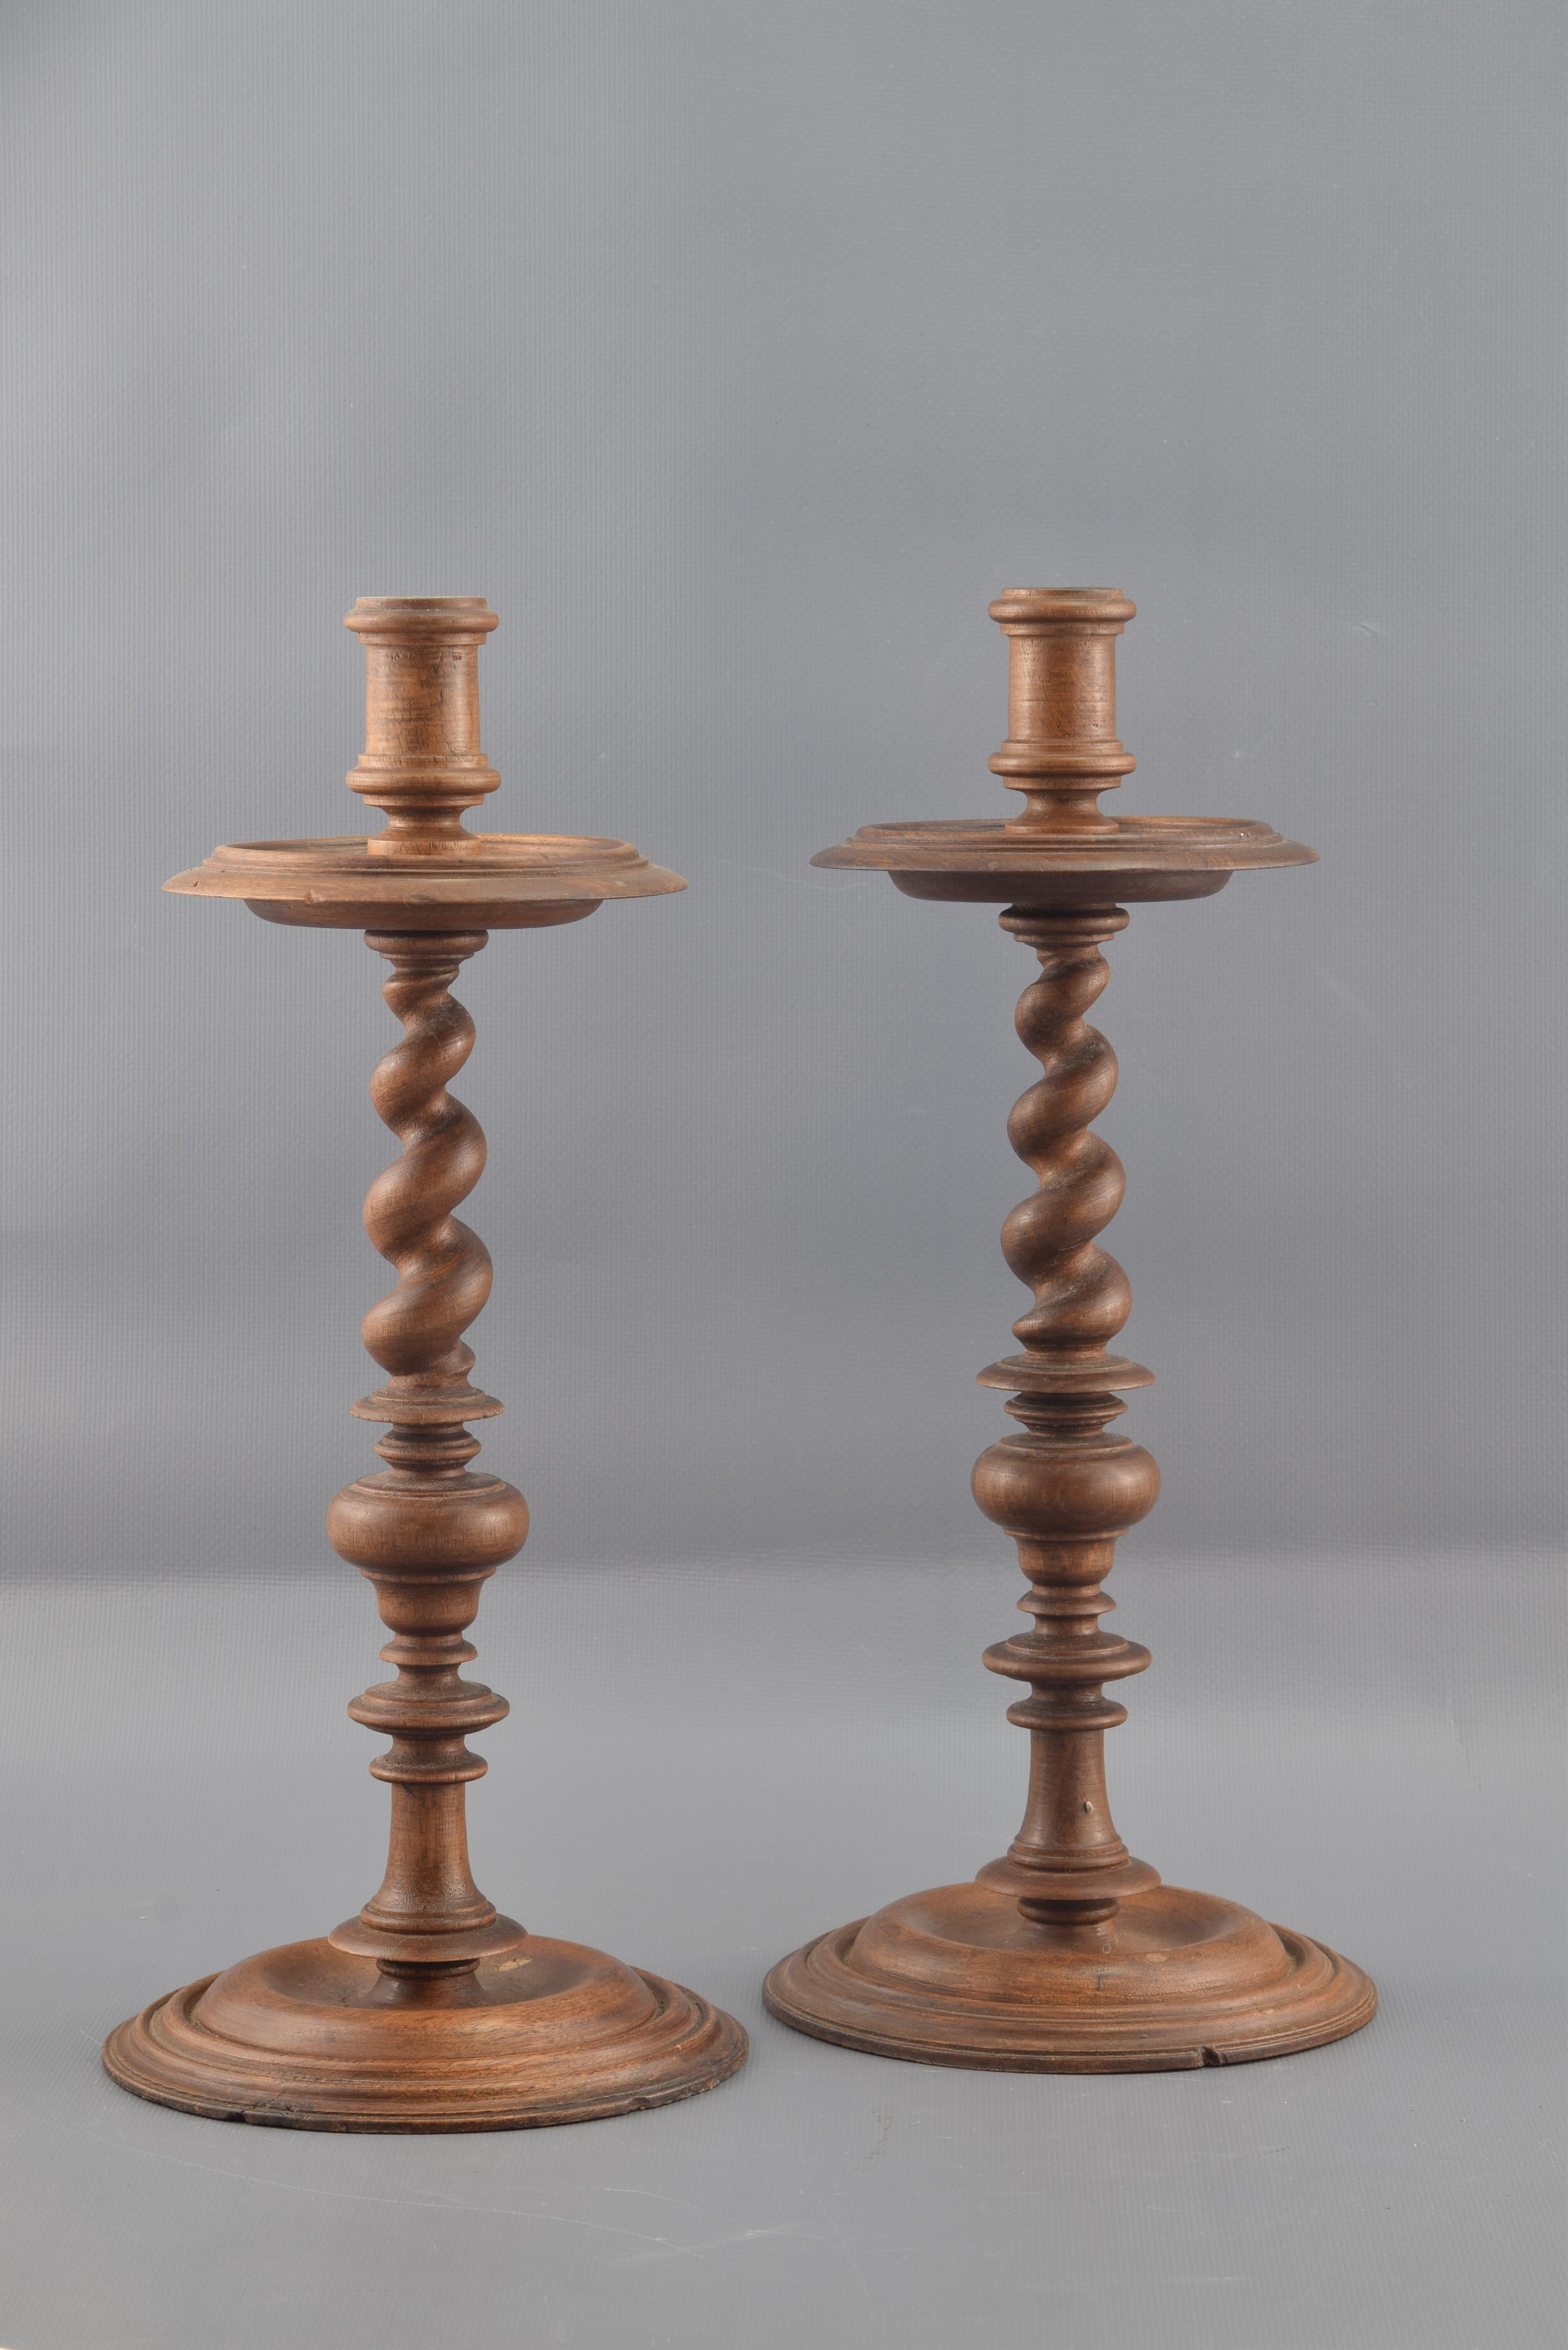 Each of the two candlesticks has a circular base decorated with a series of smooth moldings, an elaborate foot formed by discs, smooth areas, a knot in the shape of a vase and a shaft of Solomonic column and an upper part with a radio disc similar